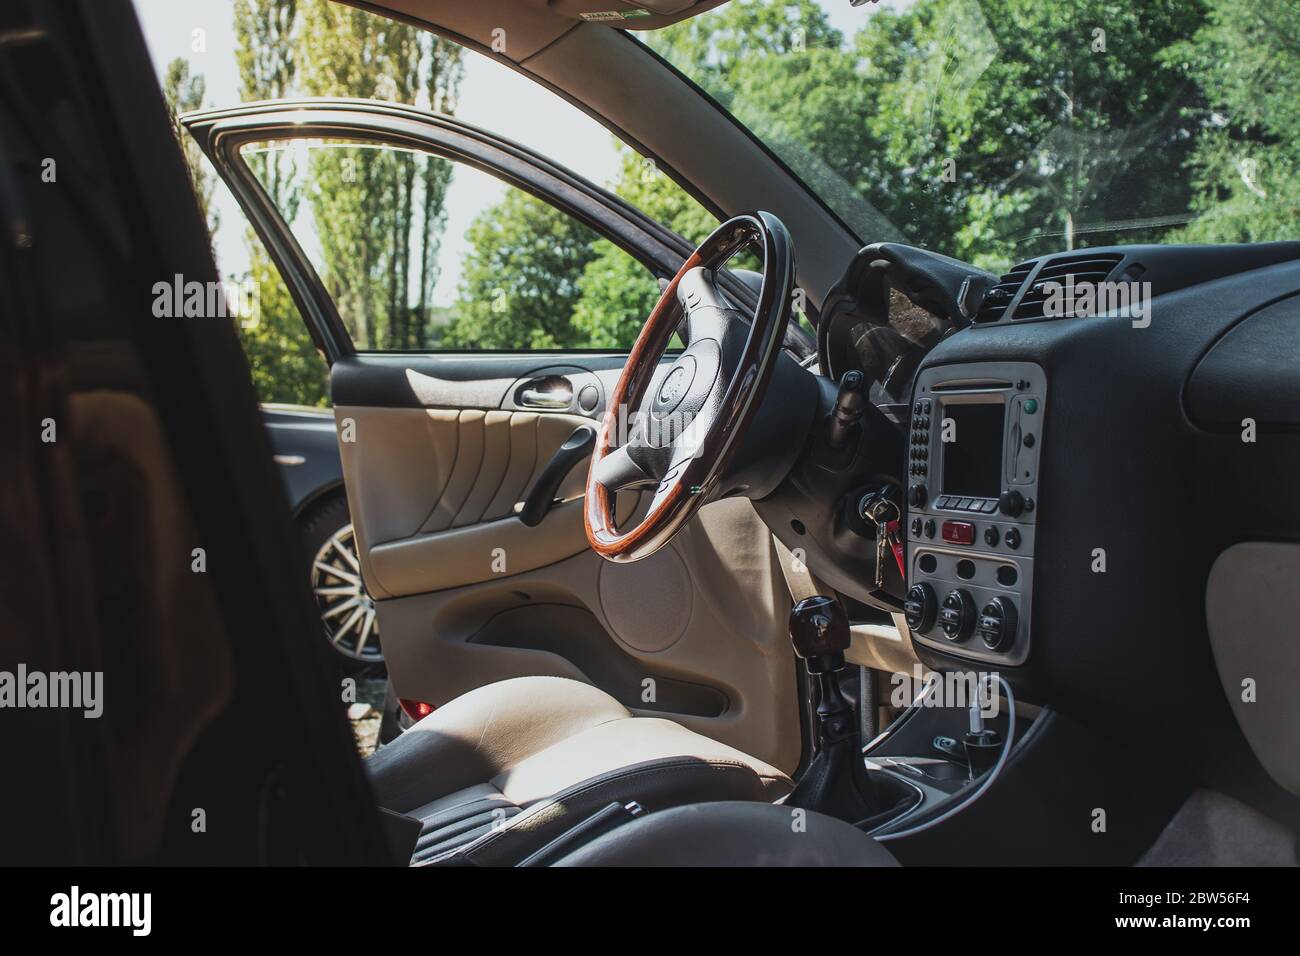 Interior of an Alfa Romeo 147, clean and polished shining exhibited on a bright sunny day Stock Photo